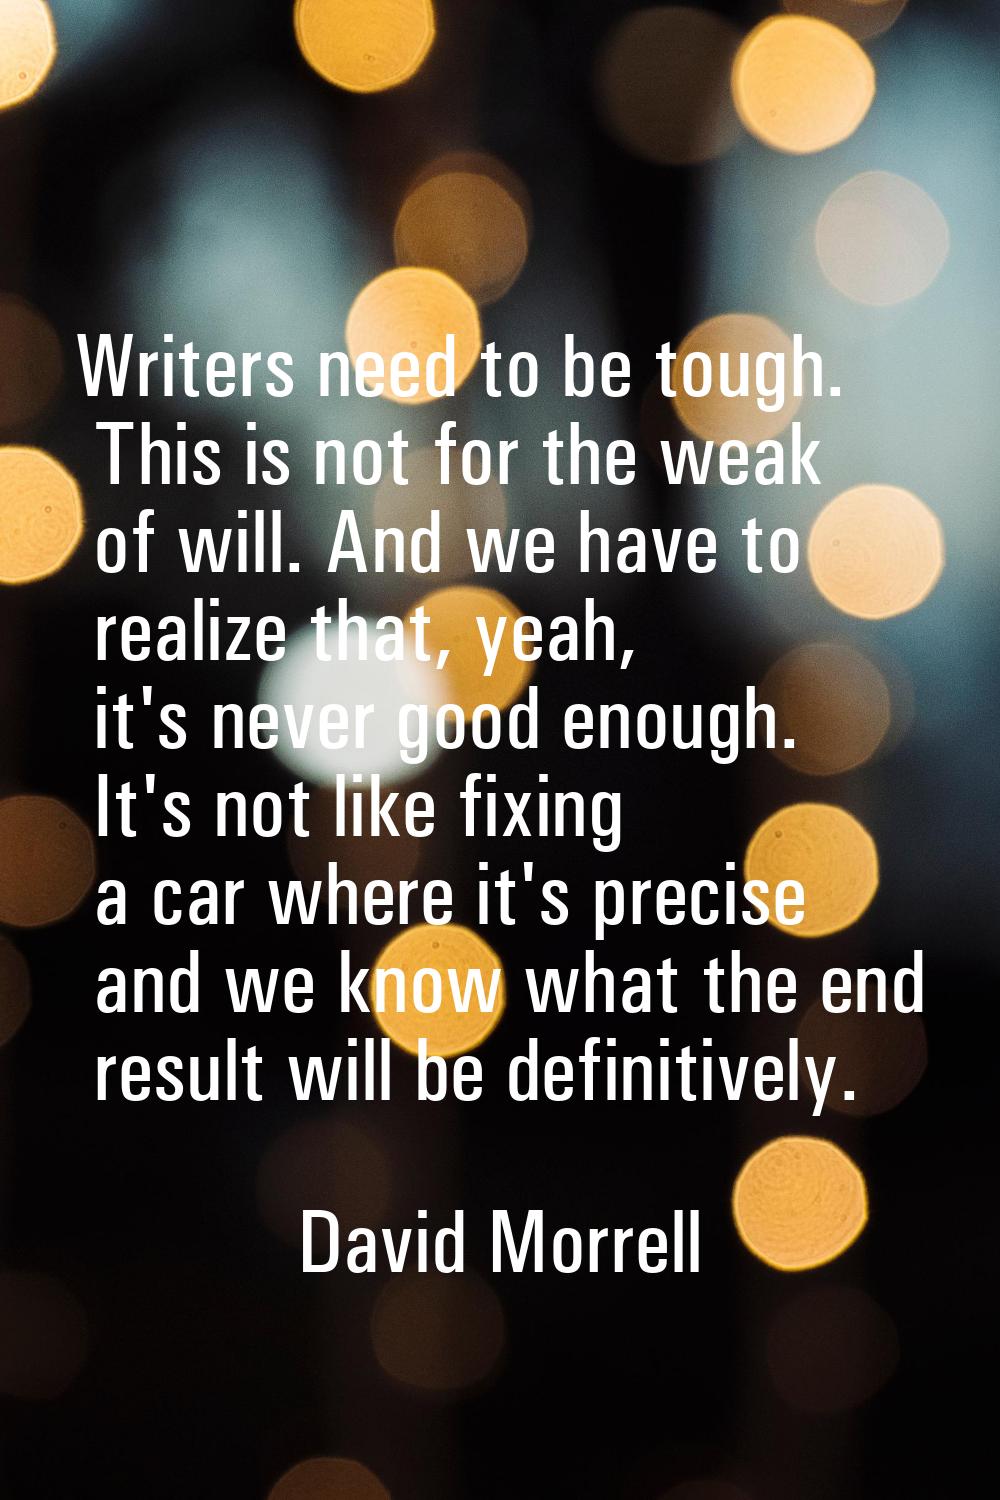 Writers need to be tough. This is not for the weak of will. And we have to realize that, yeah, it's